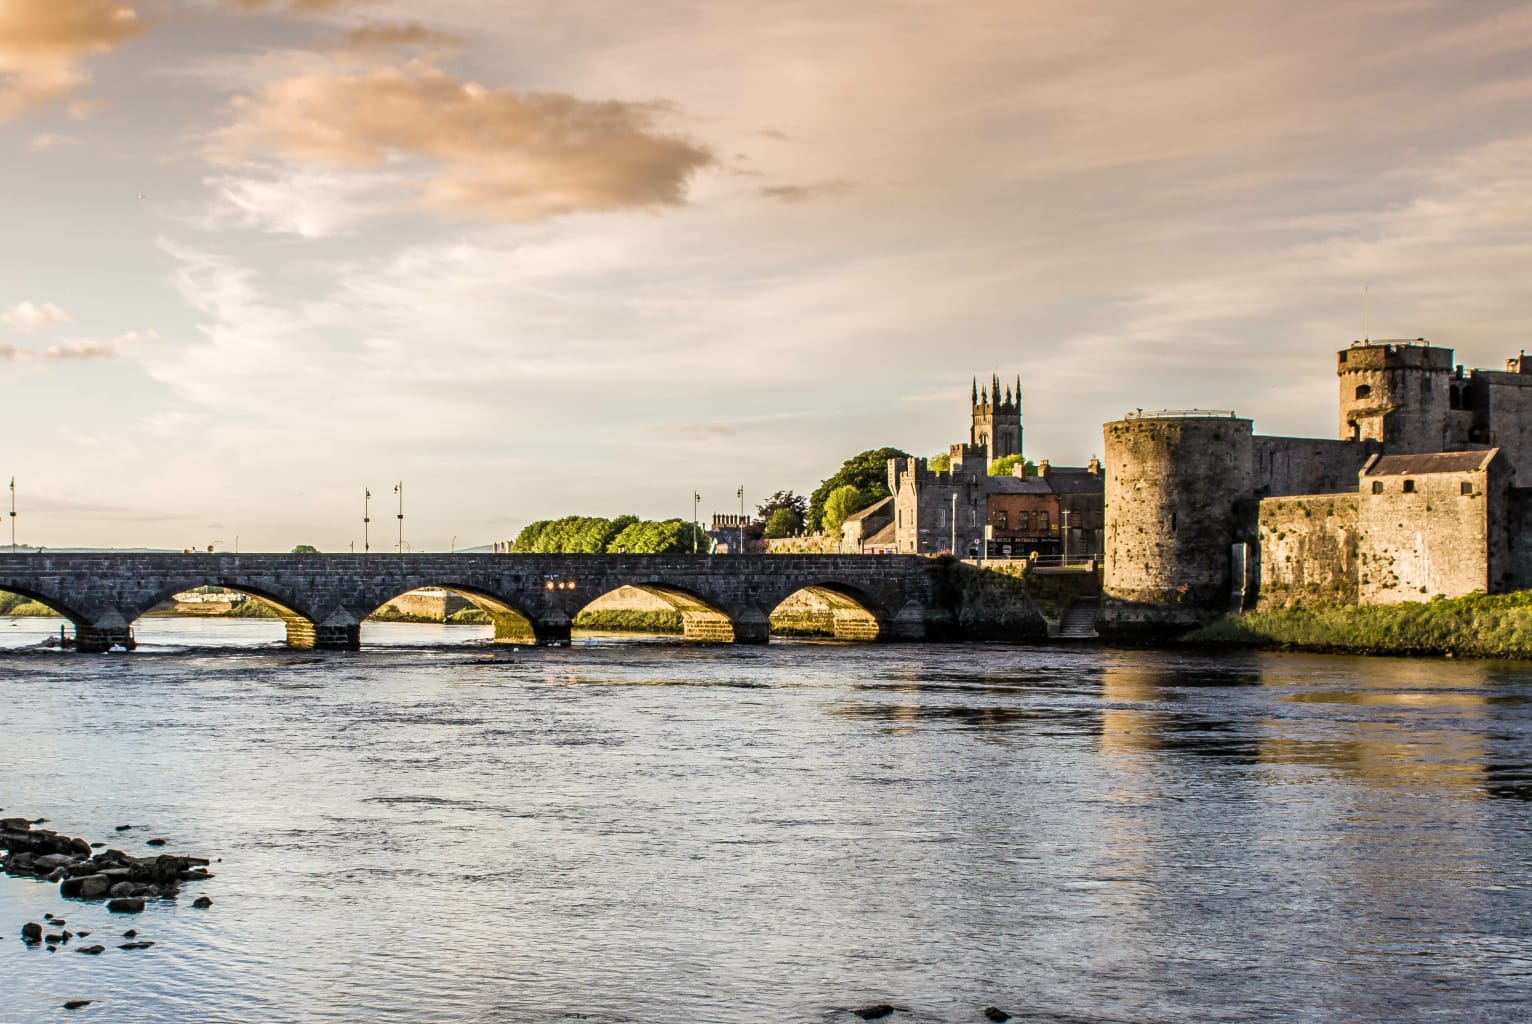 limerick river and scenery.